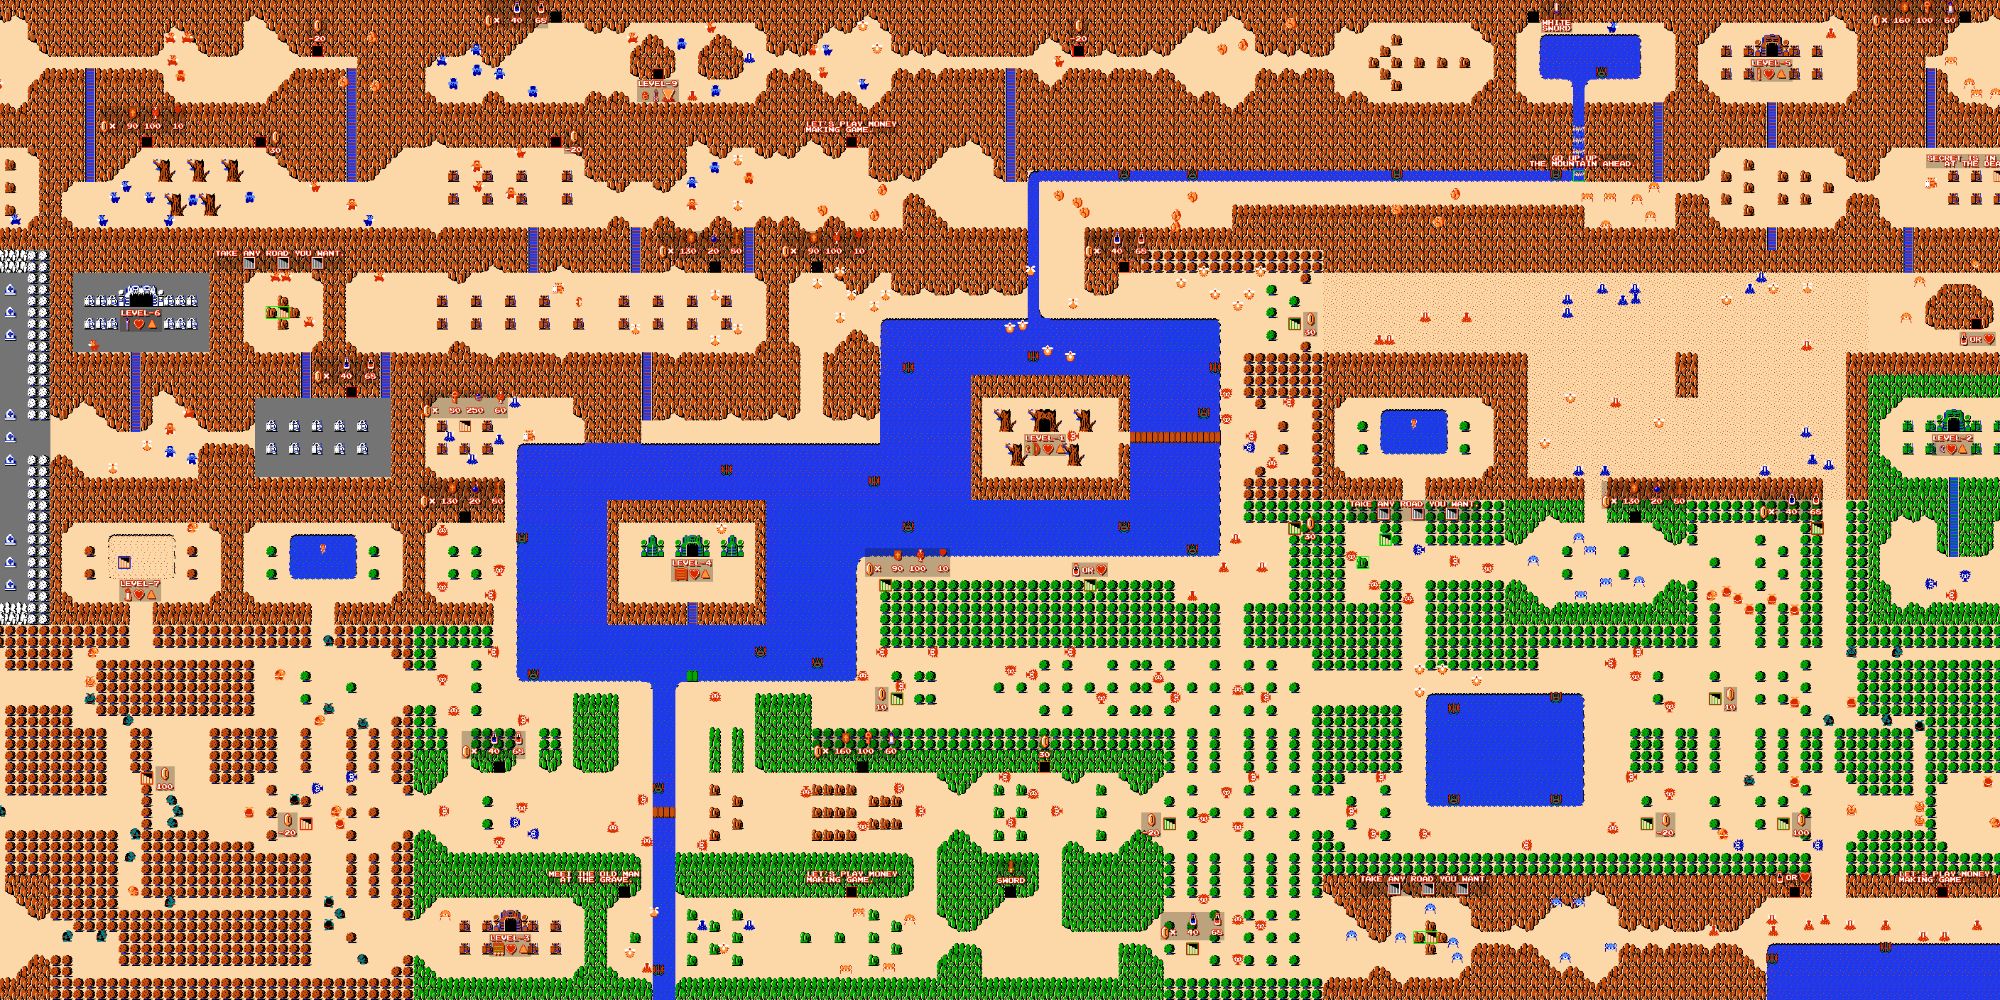 The middle section of the NES Zelda map